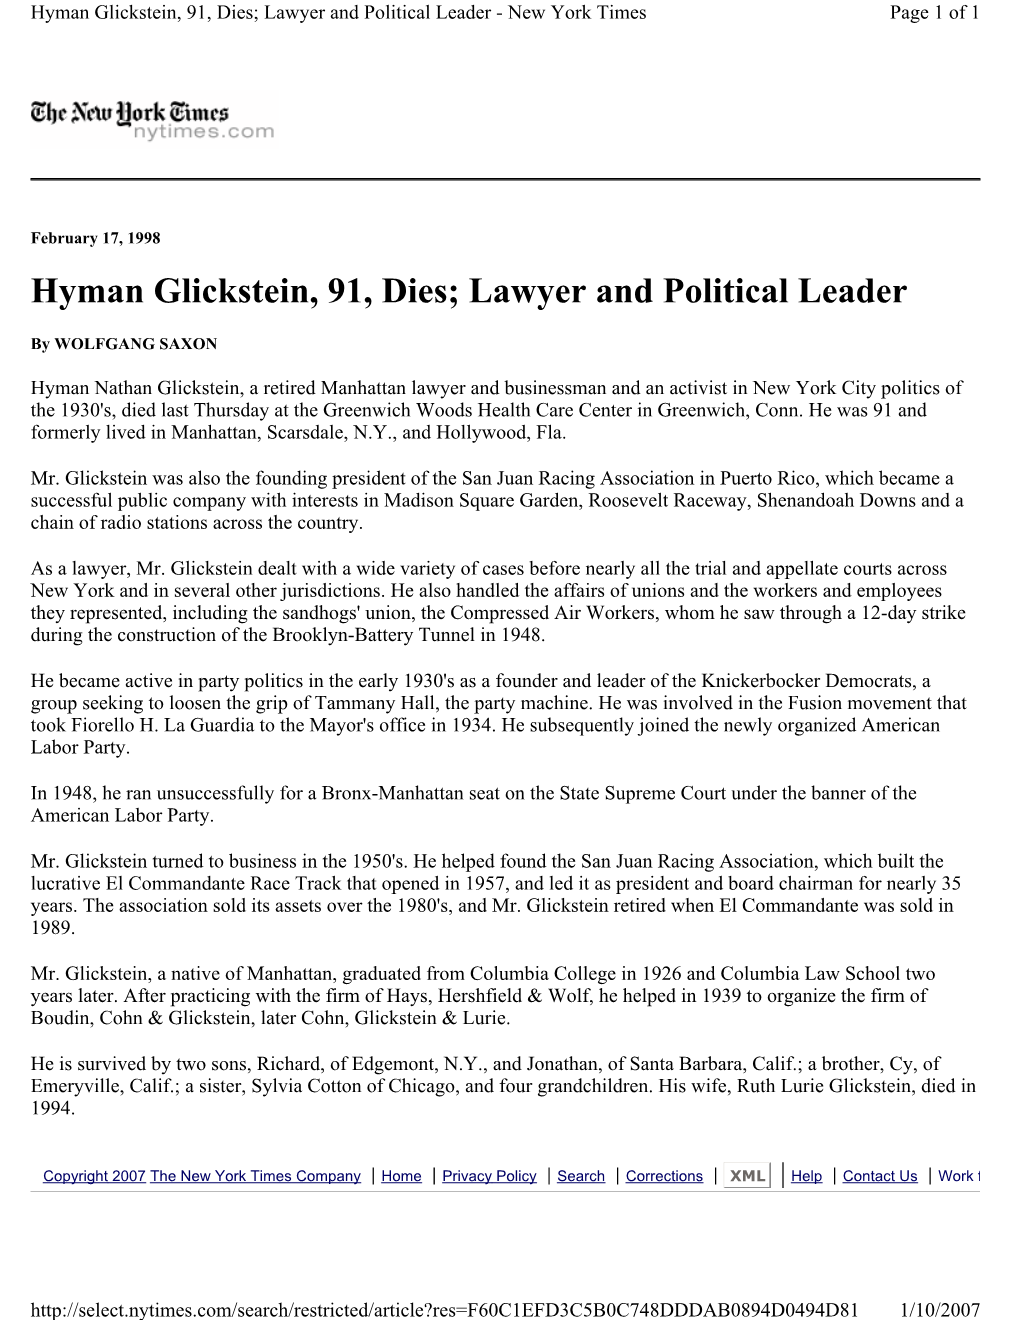 Hyman Glickstein, 91, Dies; Lawyer and Political Leader - New York Times Page 1 of 1